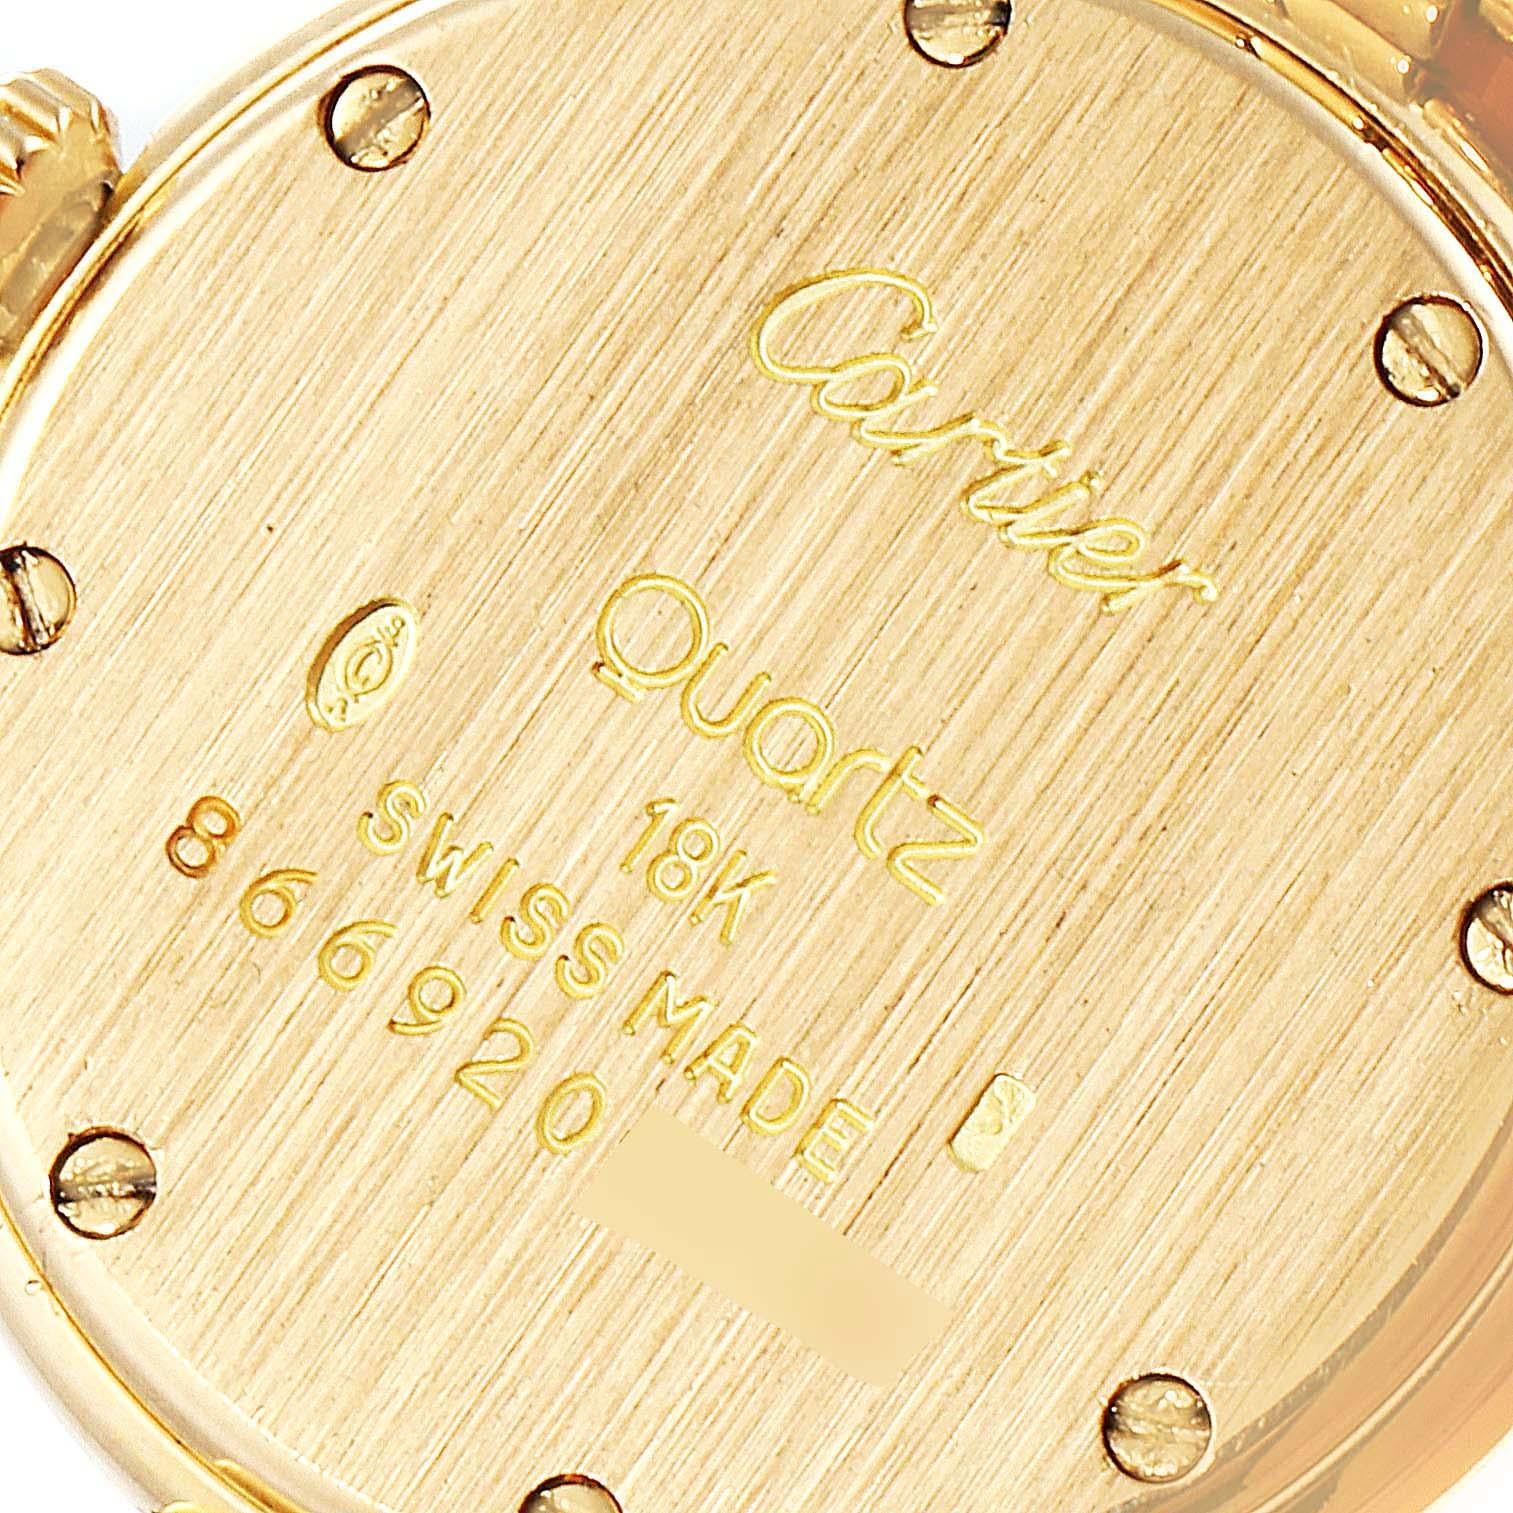 Cartier Panthere Vendome 18K Yellow Gold Ladies Watch 6692 For Sale 1